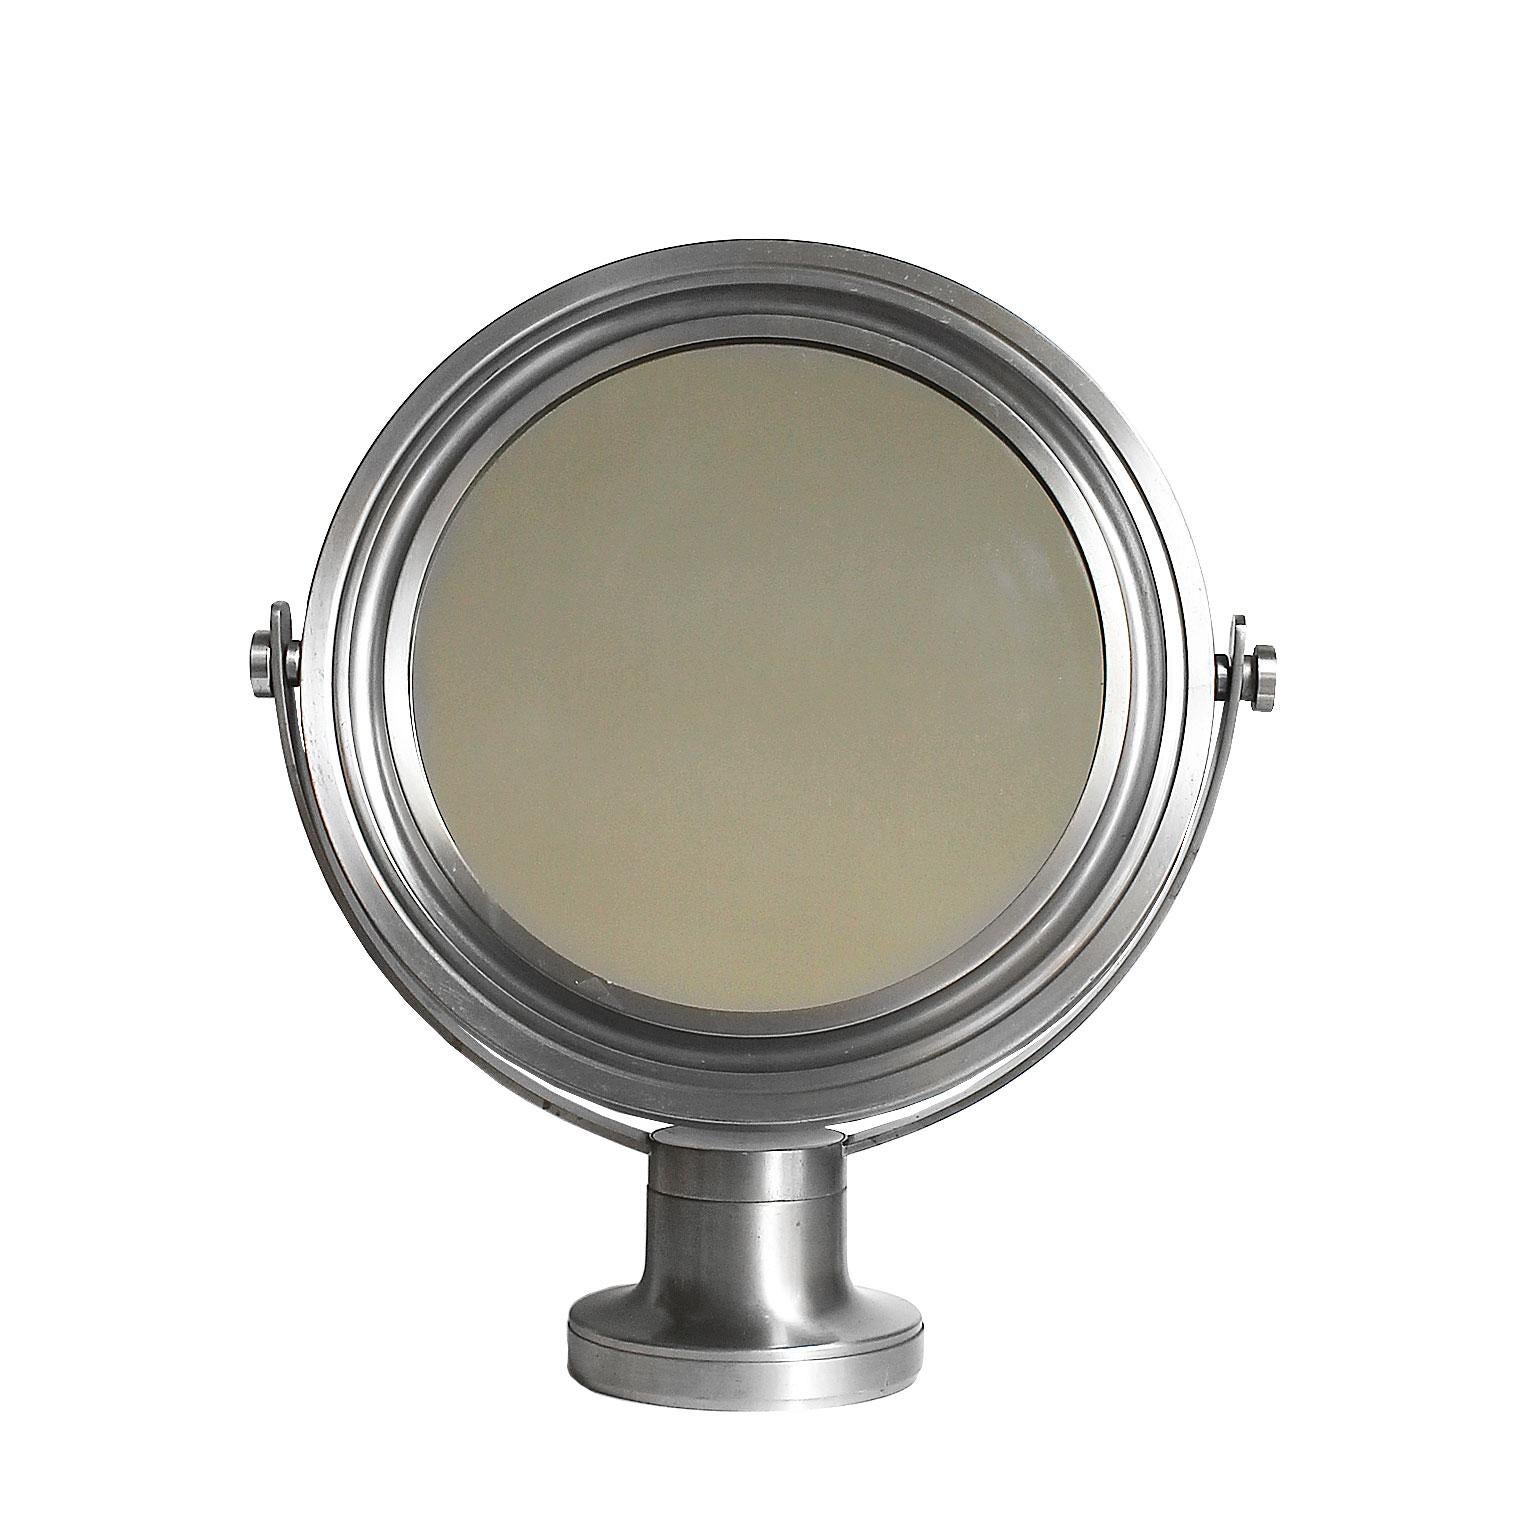 Pivoting vanity-table mirror, brushed nickel-plated frame and base. Original patina.
Design: Sergio Mazza
Italy, late 1960s.